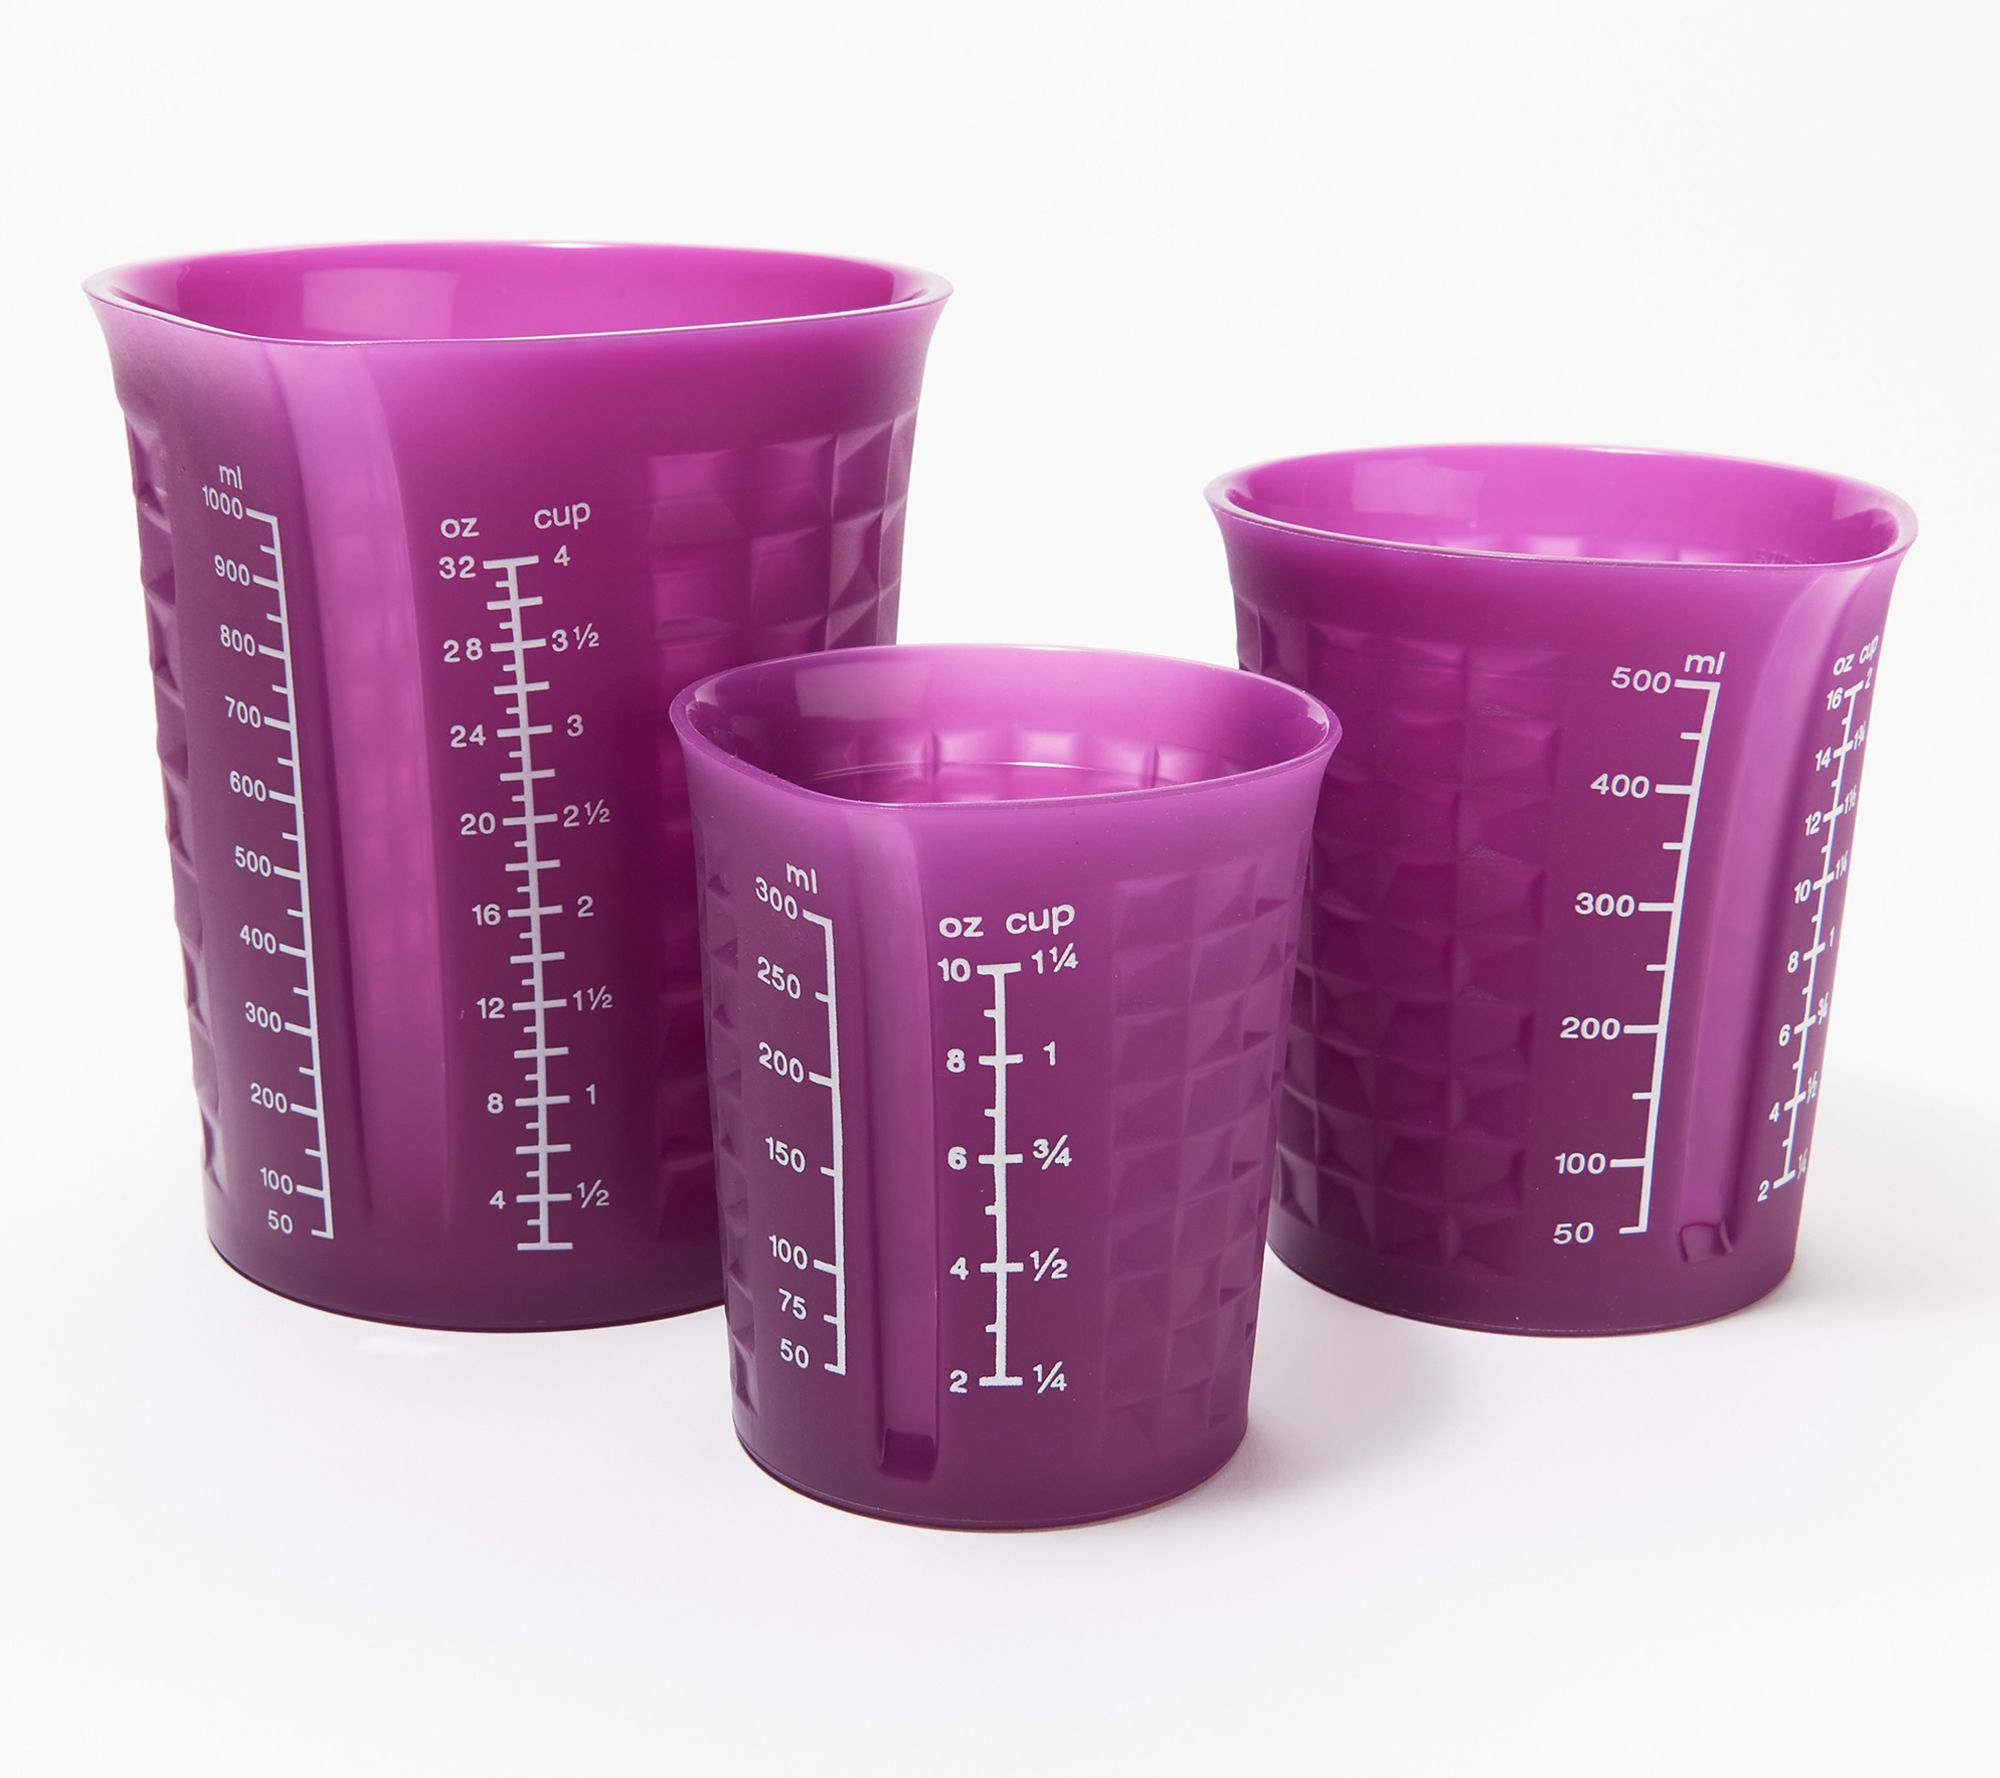  Pop Out Silicone Measuring Cups 130531